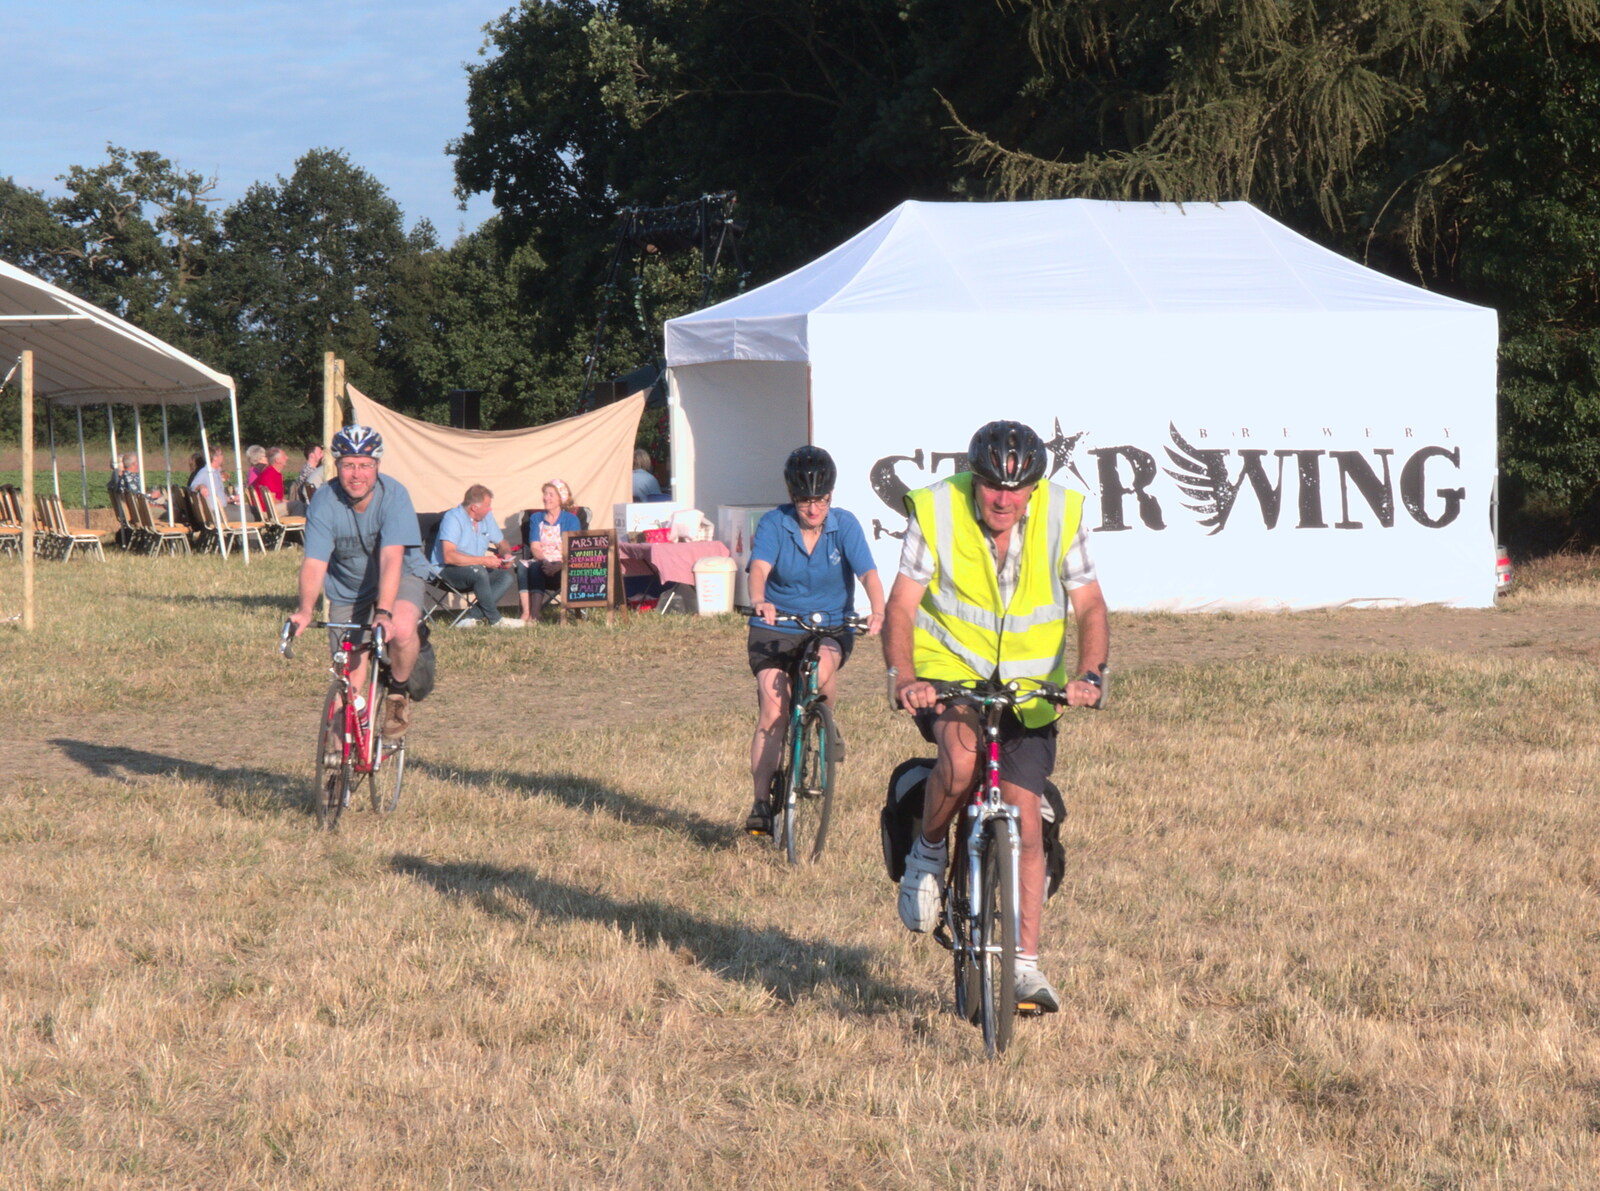 We arrive at the beer festival from The BSCC Rides to Star Wing Beer Festival, Redgrave, Suffolk - 12th July 2018